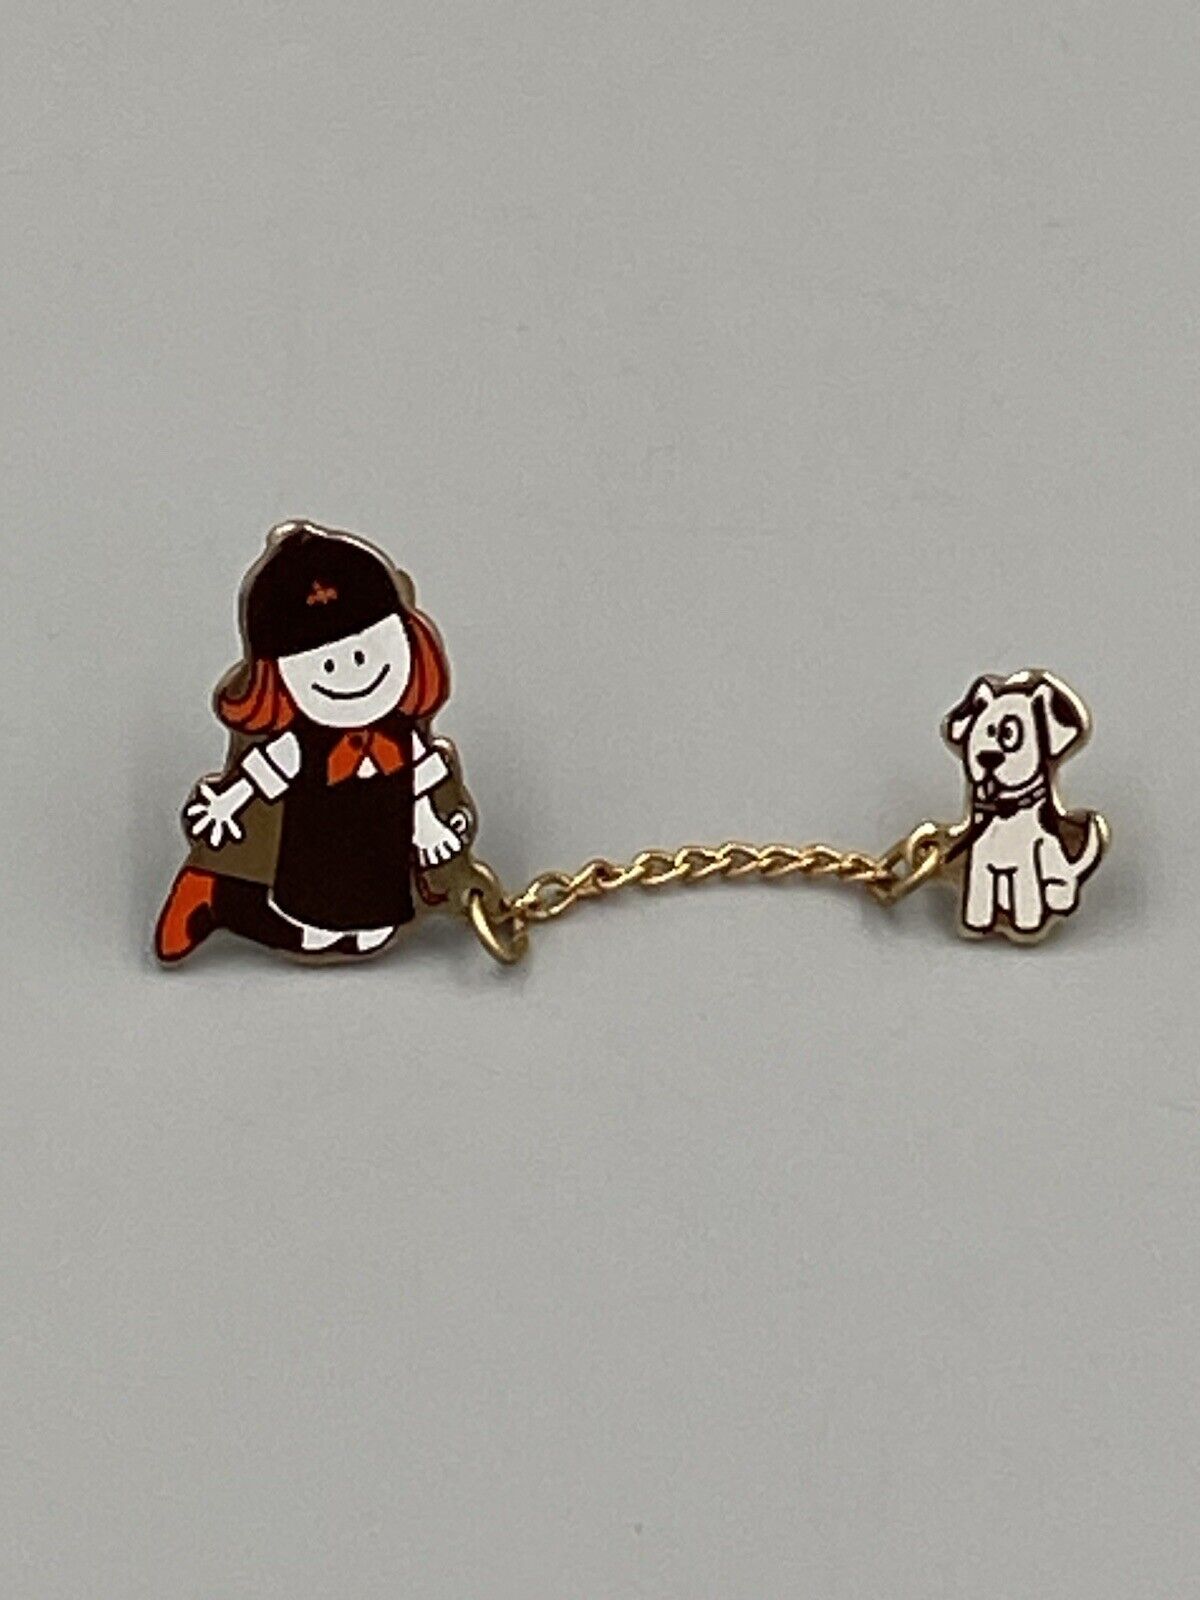 Vintage Red Hair Little Girl & Dog on Chain Collectible Dangle Lapel Pin Brooch